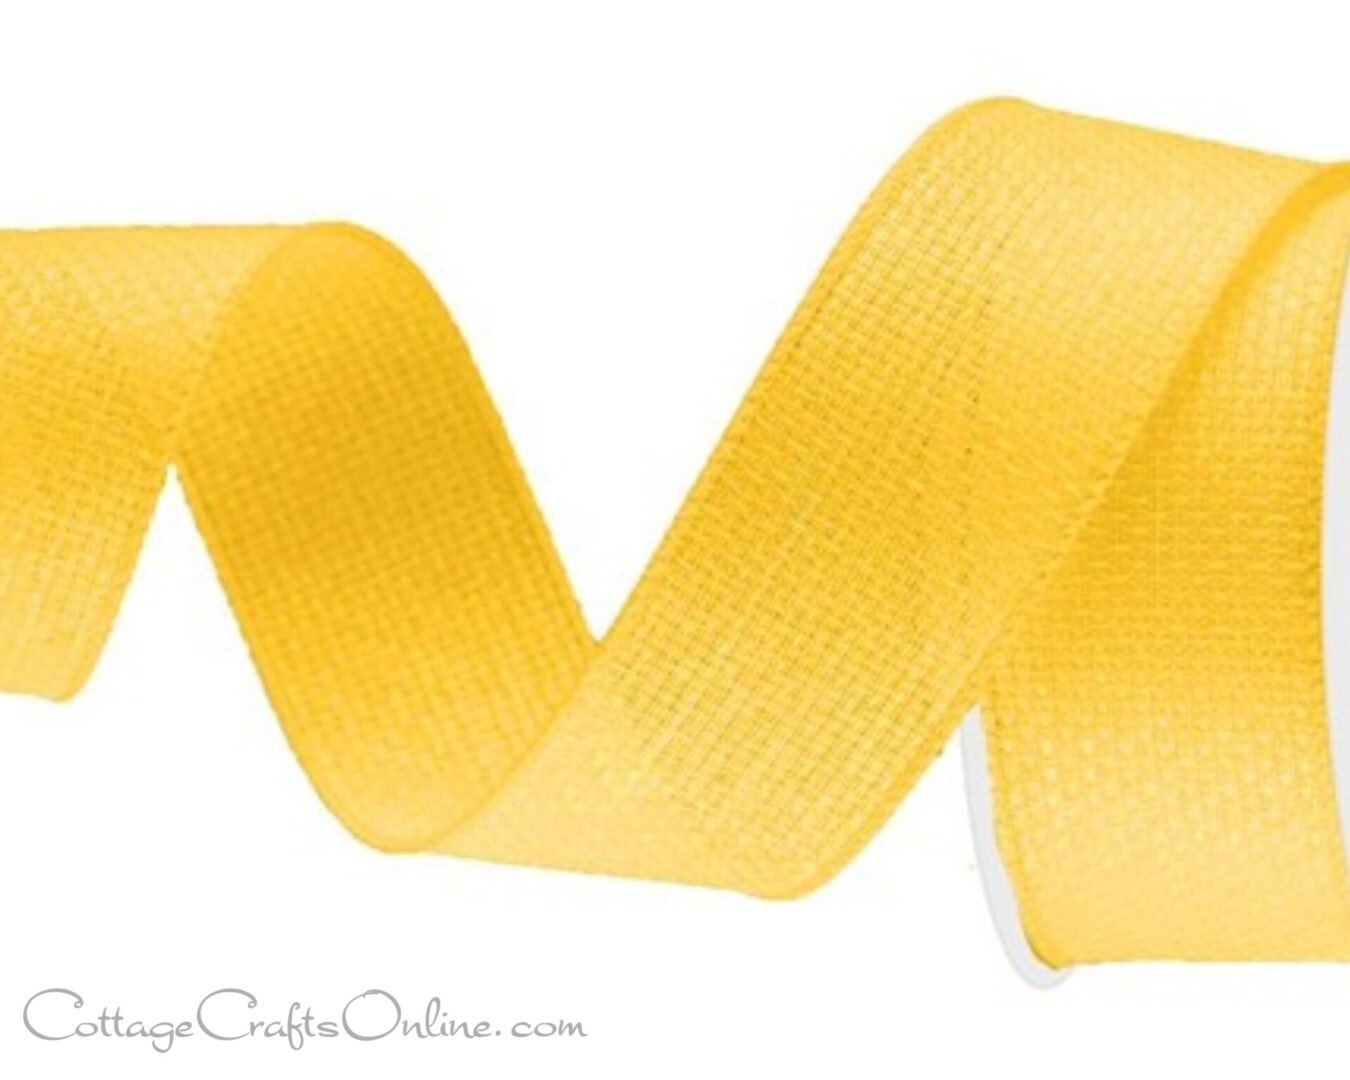 a yellow grosgrain ribbon on a white background.